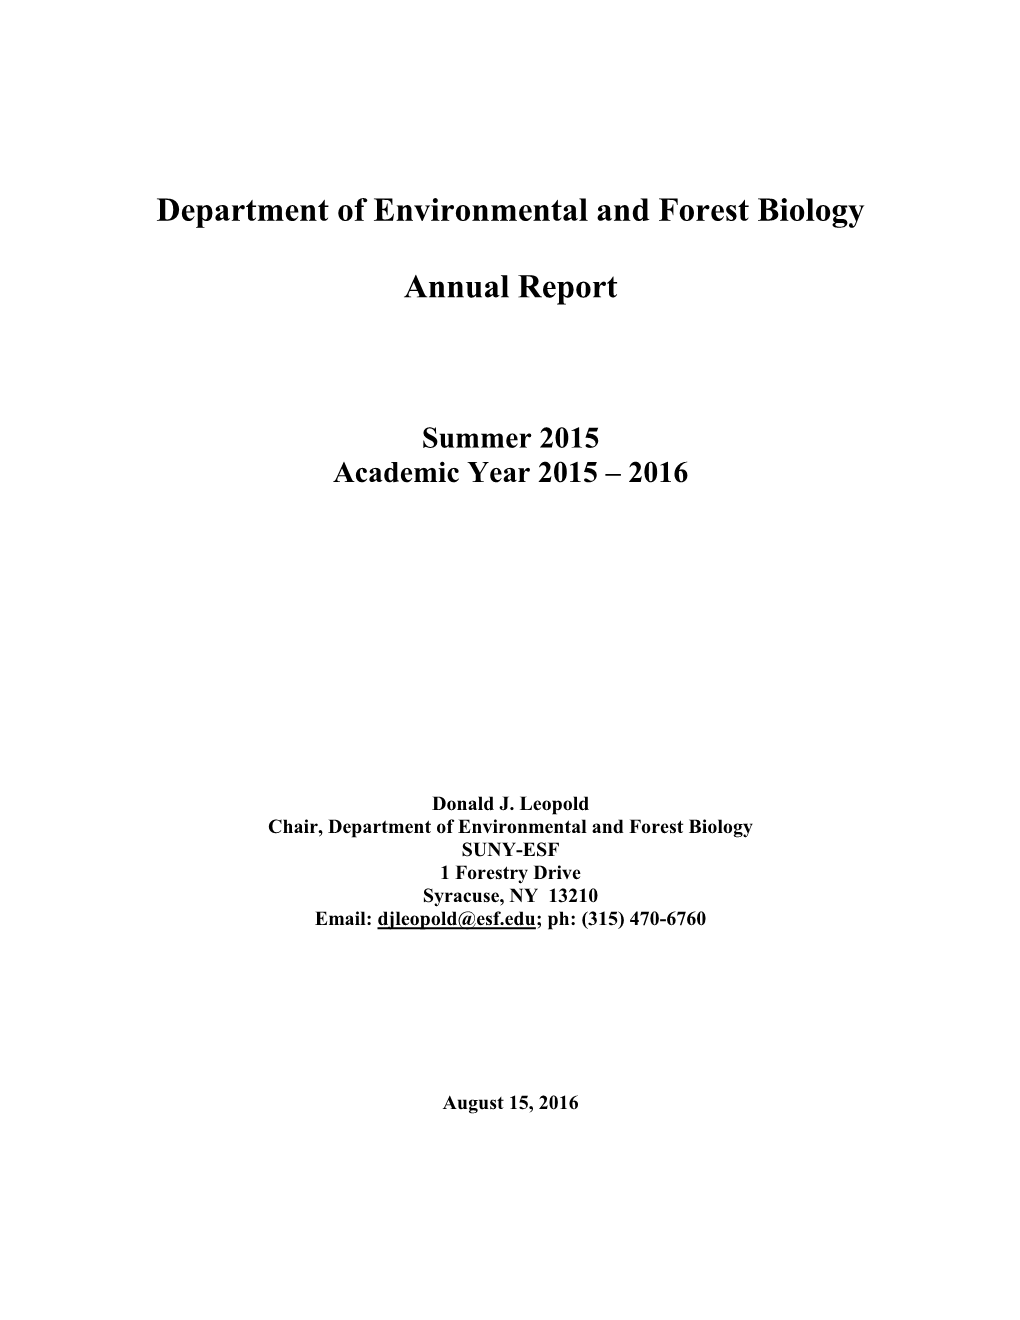 Department of Environmental and Forest Biology Annual Report